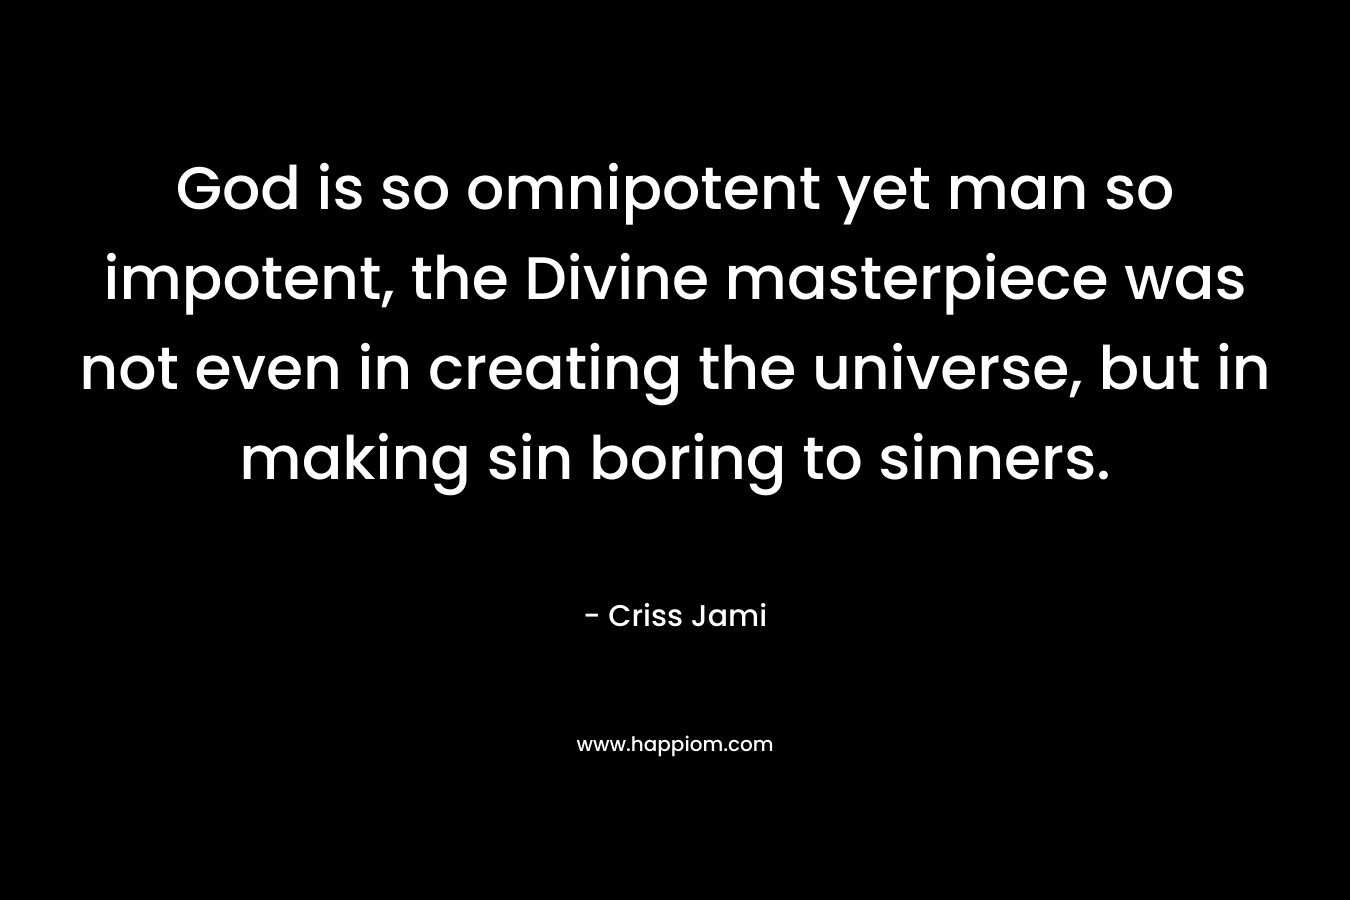 God is so omnipotent yet man so impotent, the Divine masterpiece was not even in creating the universe, but in making sin boring to sinners. – Criss Jami